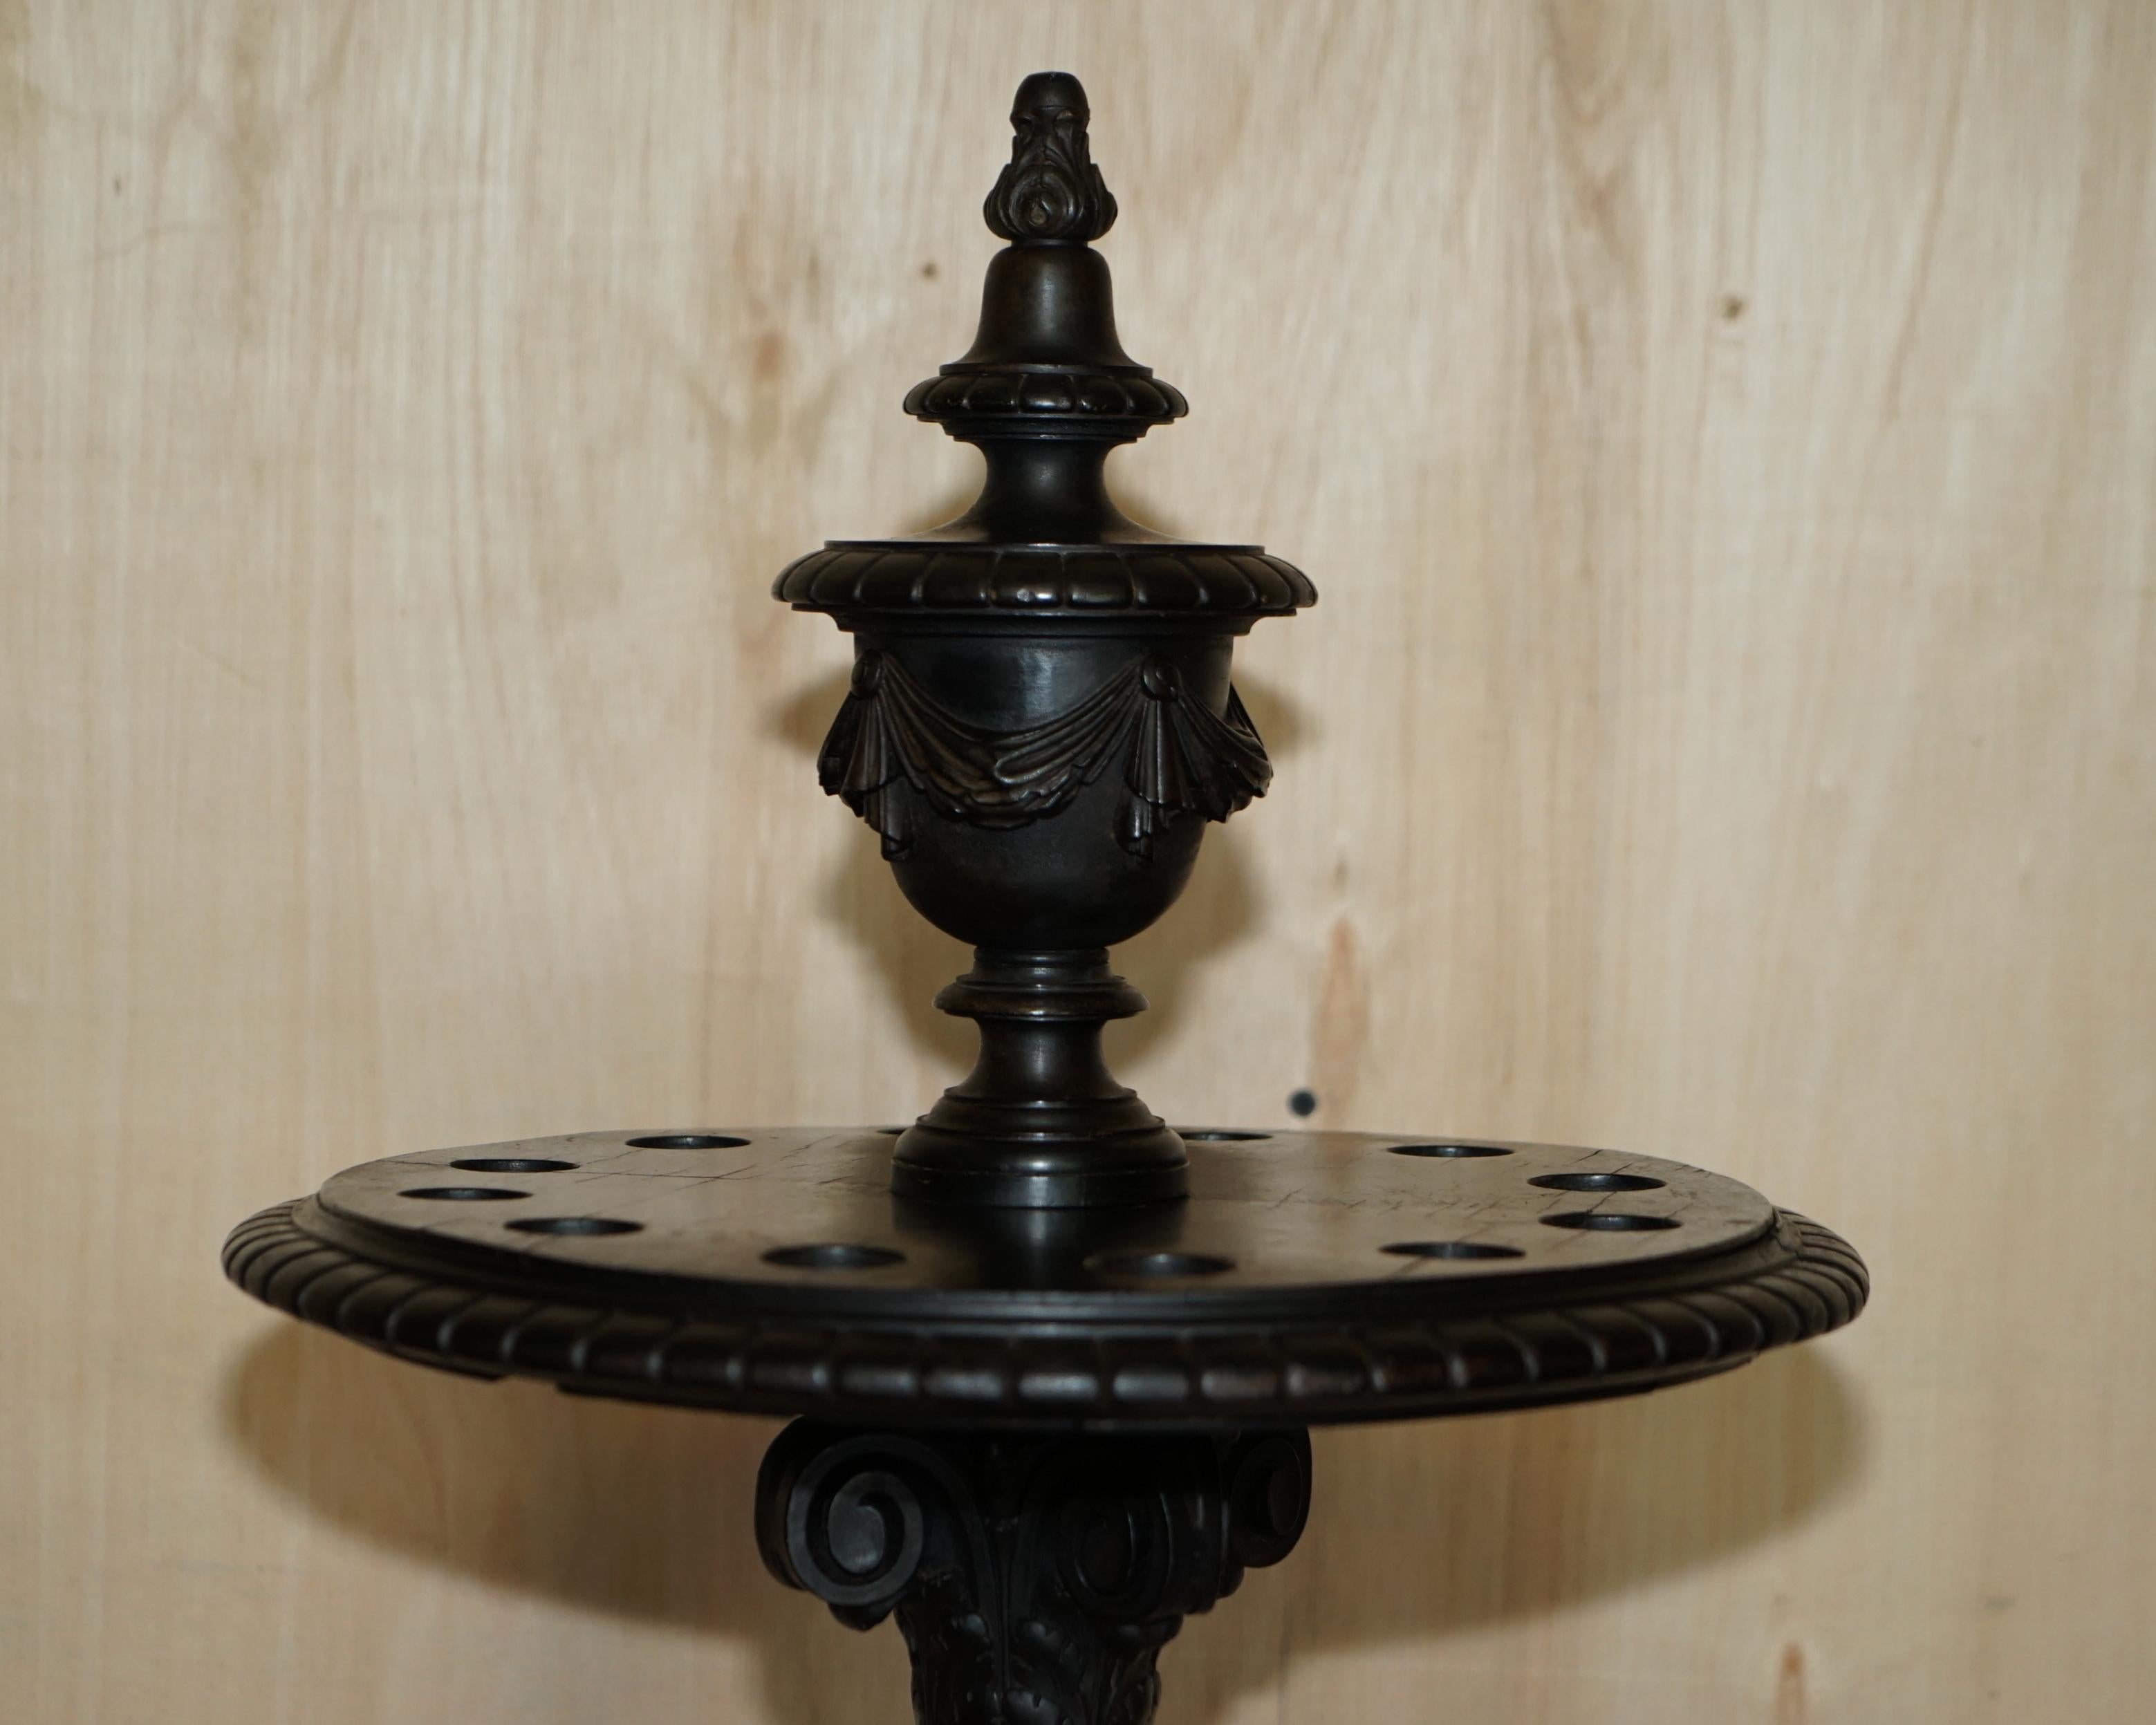 We are delighted to offer for sale this stunning original Victorian circa 1860 ebonised, revolving, snooker or pool cue stand.

A very good looking and decorative, original Victorian cue stand in restored condition.

It revolves nicely and has a